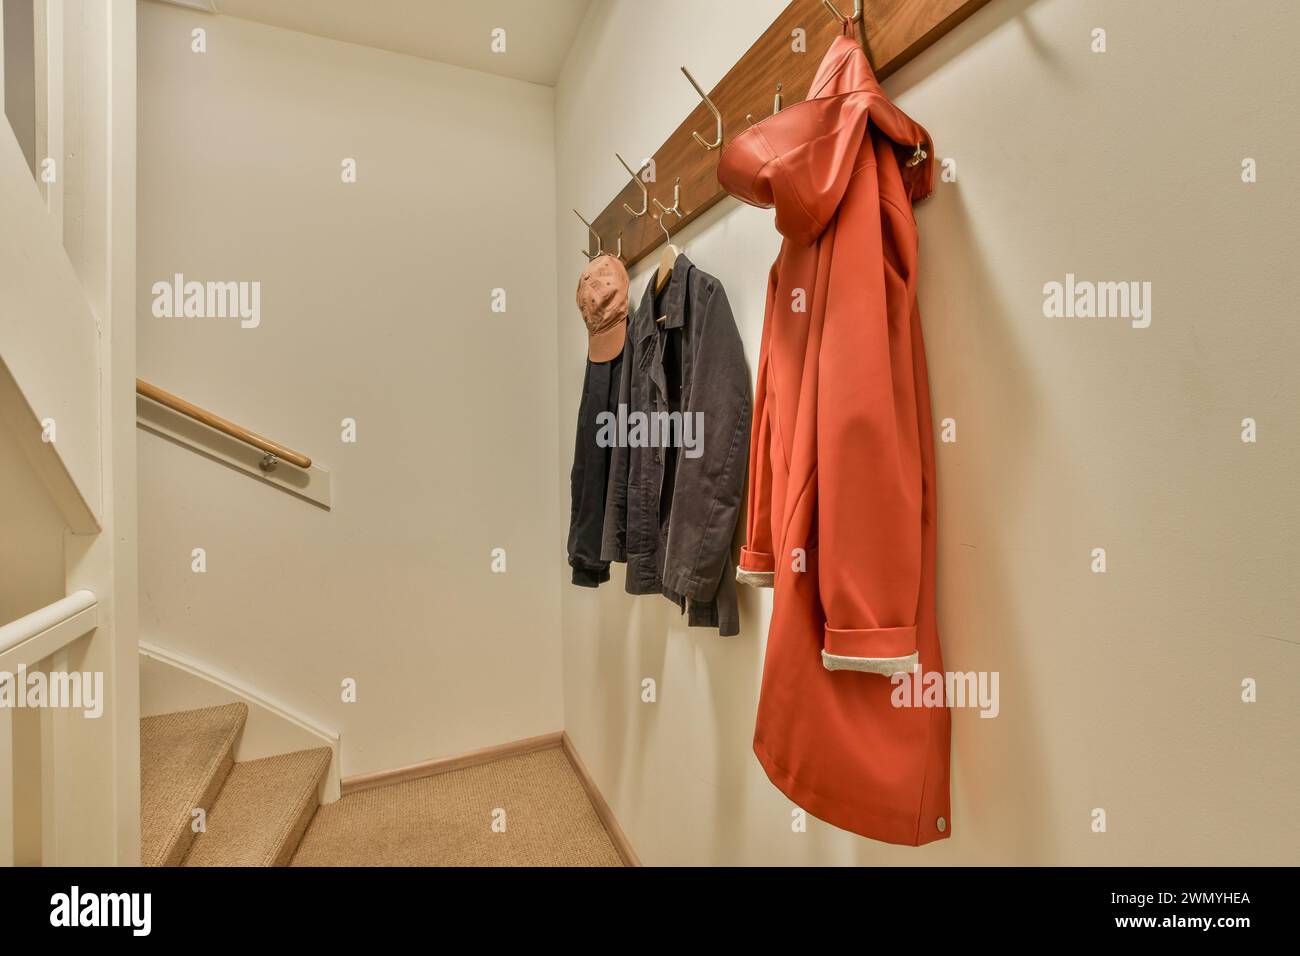 A warm and inviting home entryway features coats and hats neatly hung on wooden hooks, with a stair railing to the side. Stock Photo